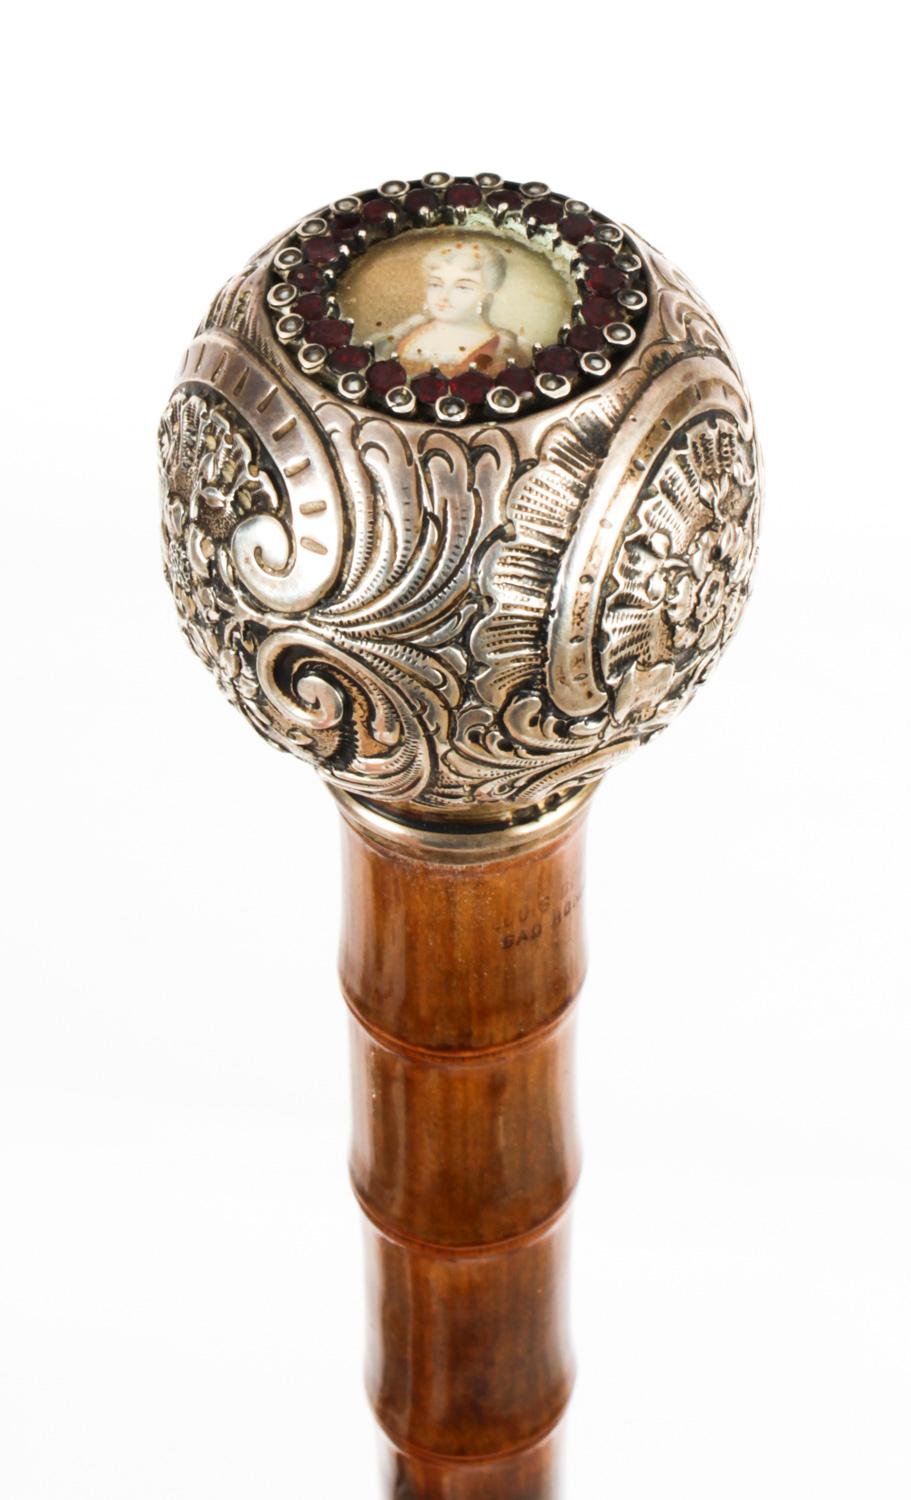 This is a fantastic antique French silver and bamboo walking stick, circa 1880 in date.

It has a very decorative silver pommel which is inset with a glazed portrait within a surround of garnets  with an extra long sturdy bamboo tapering shaft which